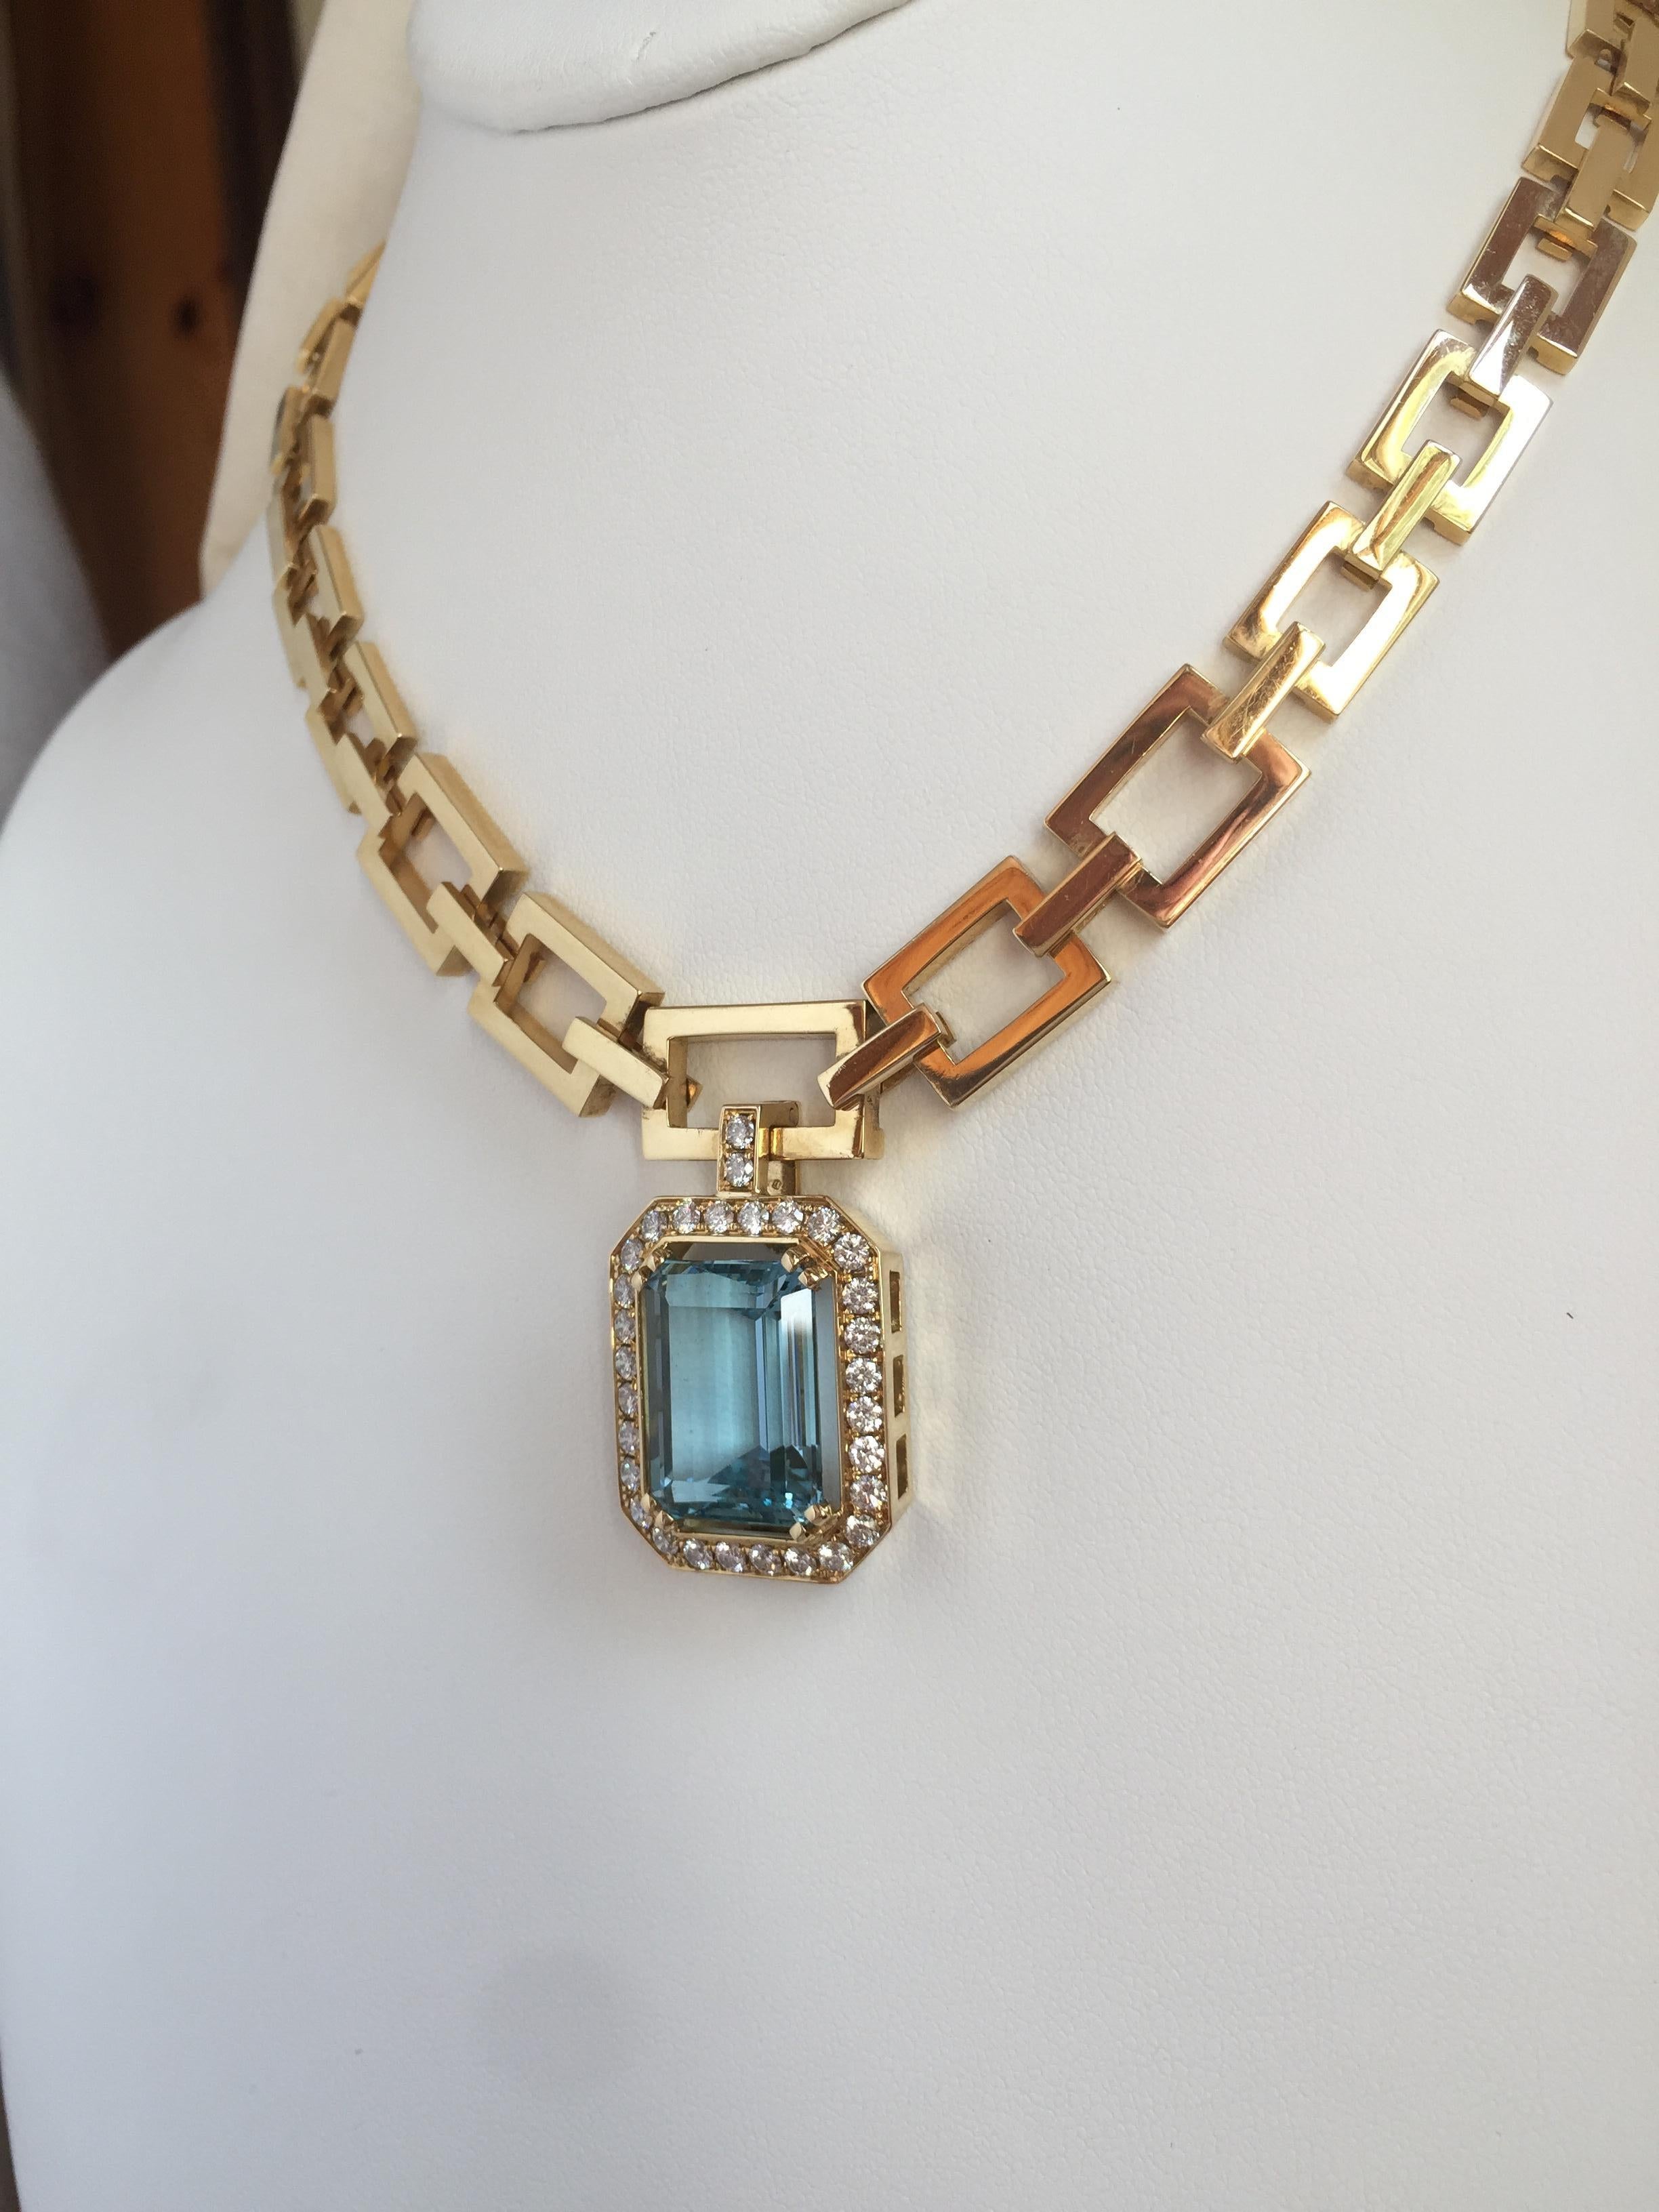 JdJ Couture Emerald Cut Aquamarine and Diamond Necklace in 14 Karat Yellow Gold For Sale 2